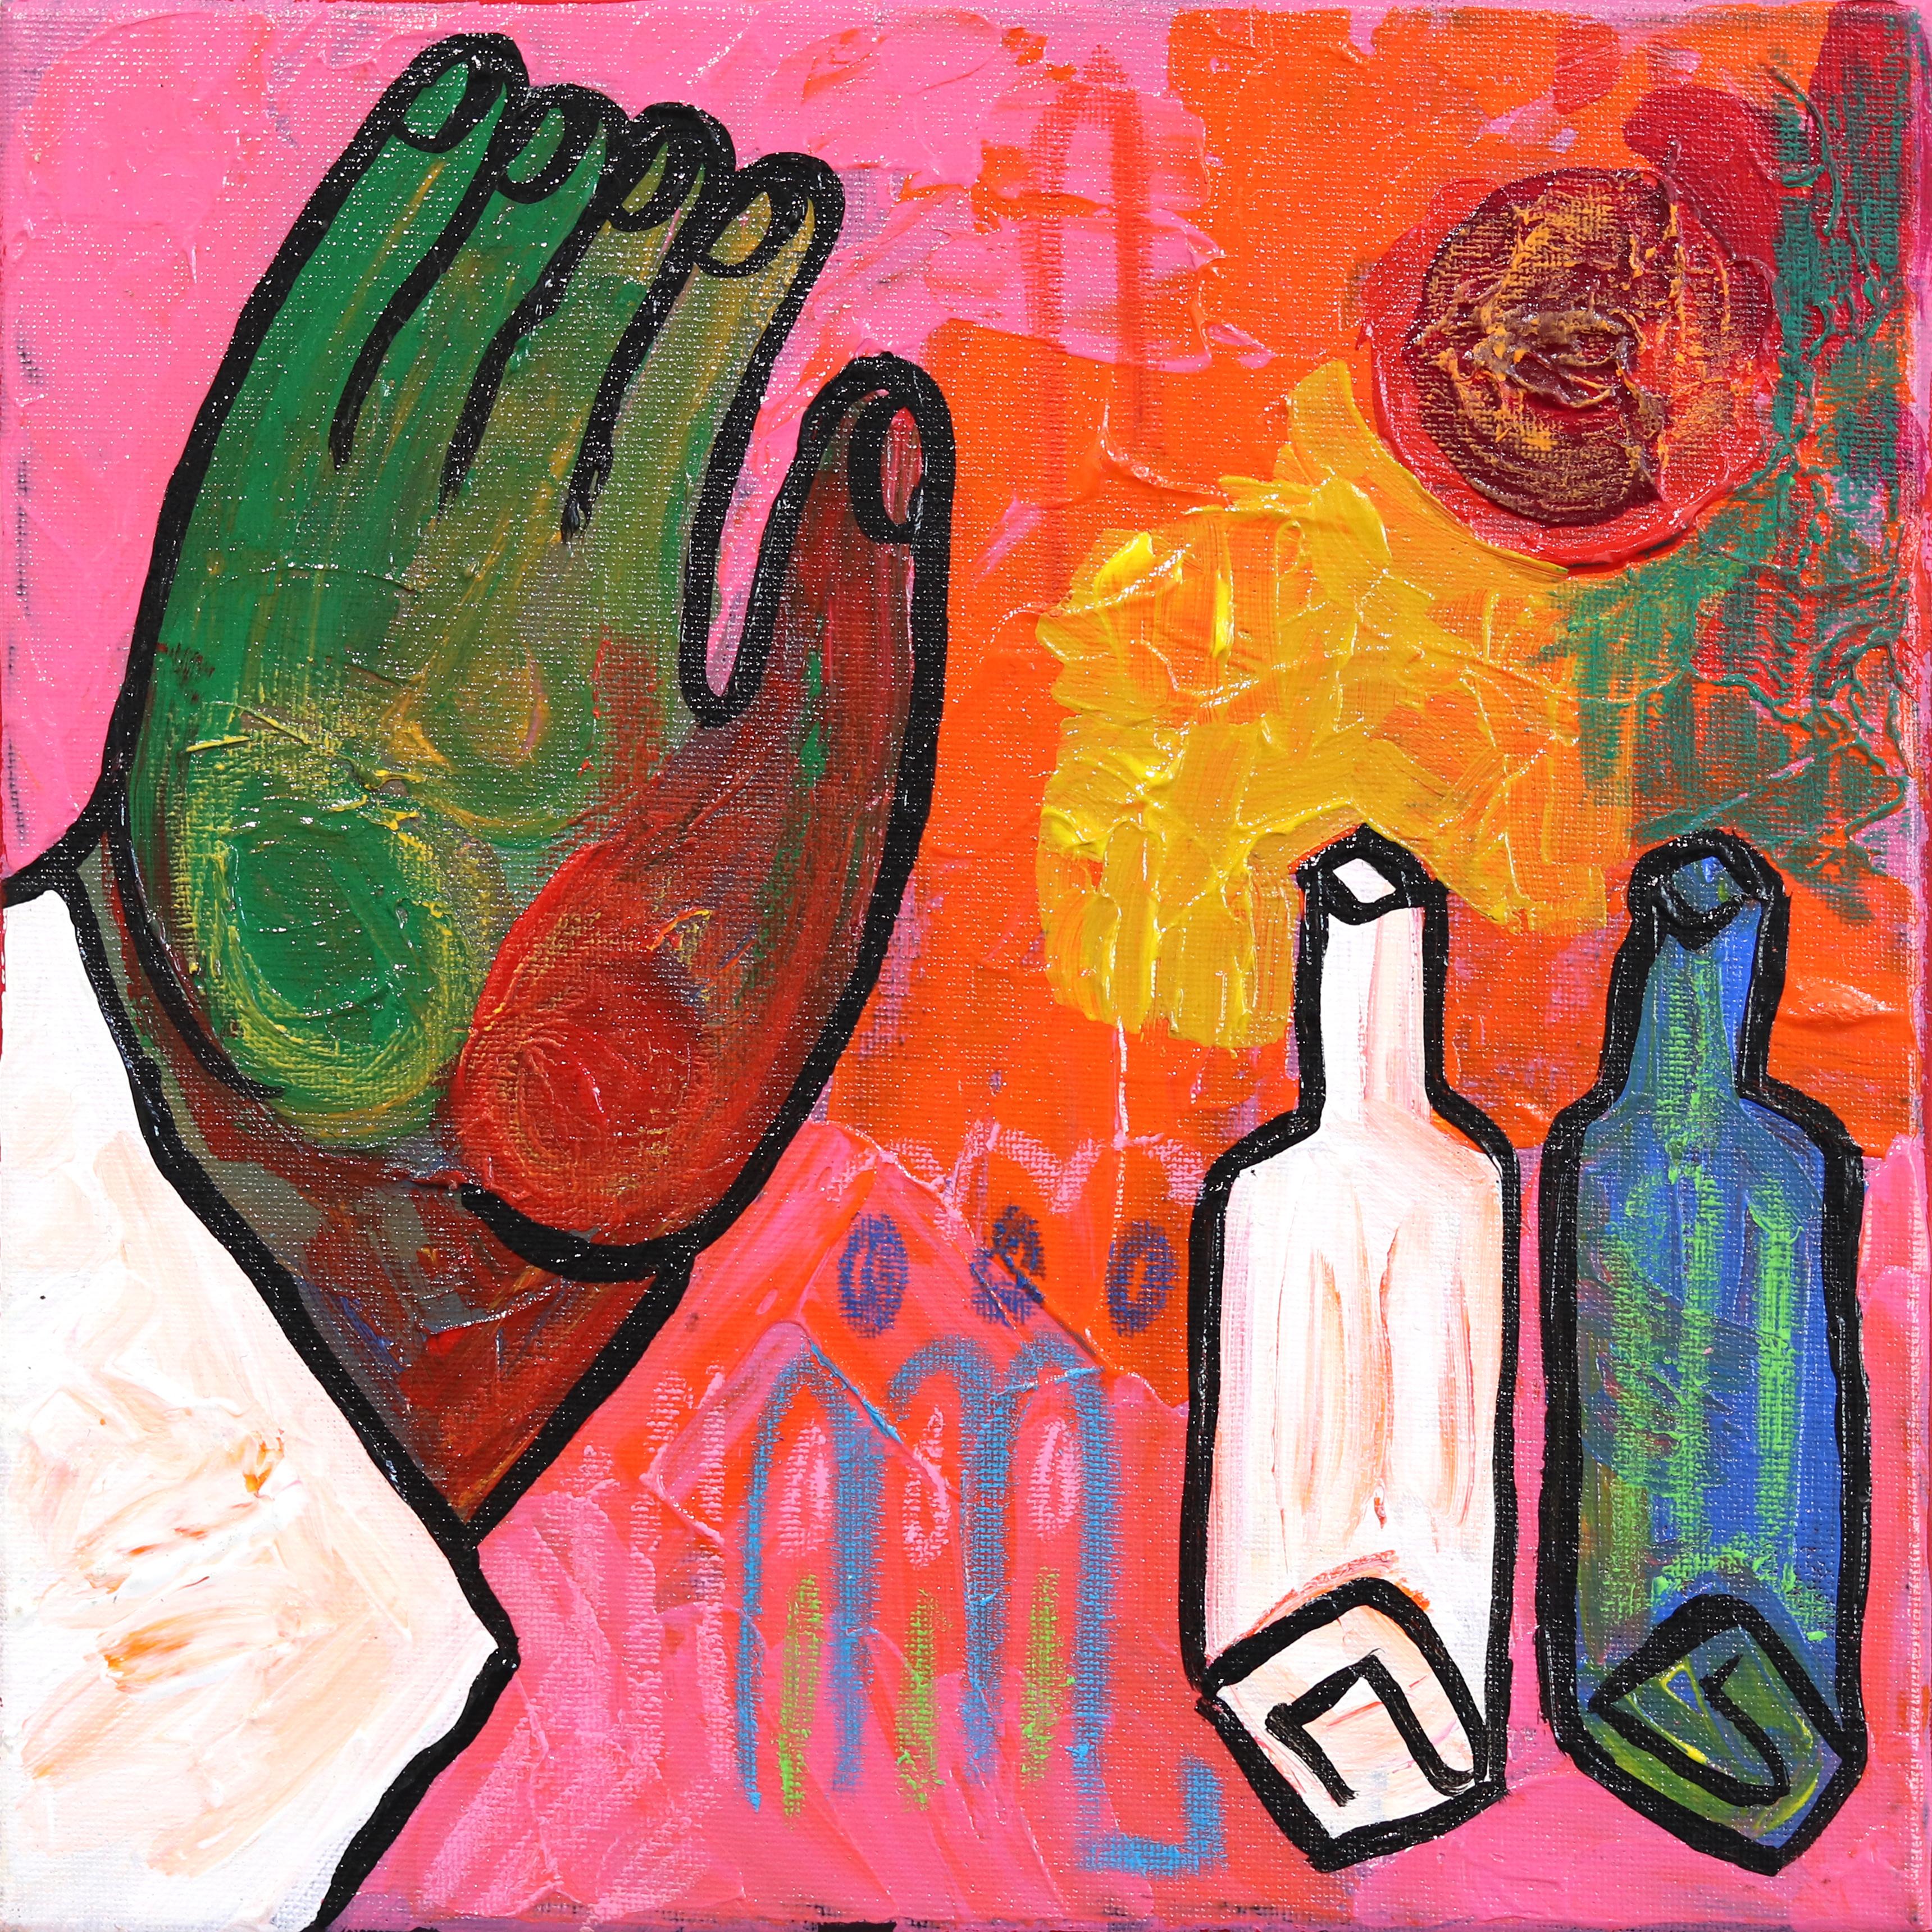 No, Thank You -  Colorful Abstract Figurative Hand and Bottles Artwork on Canvas